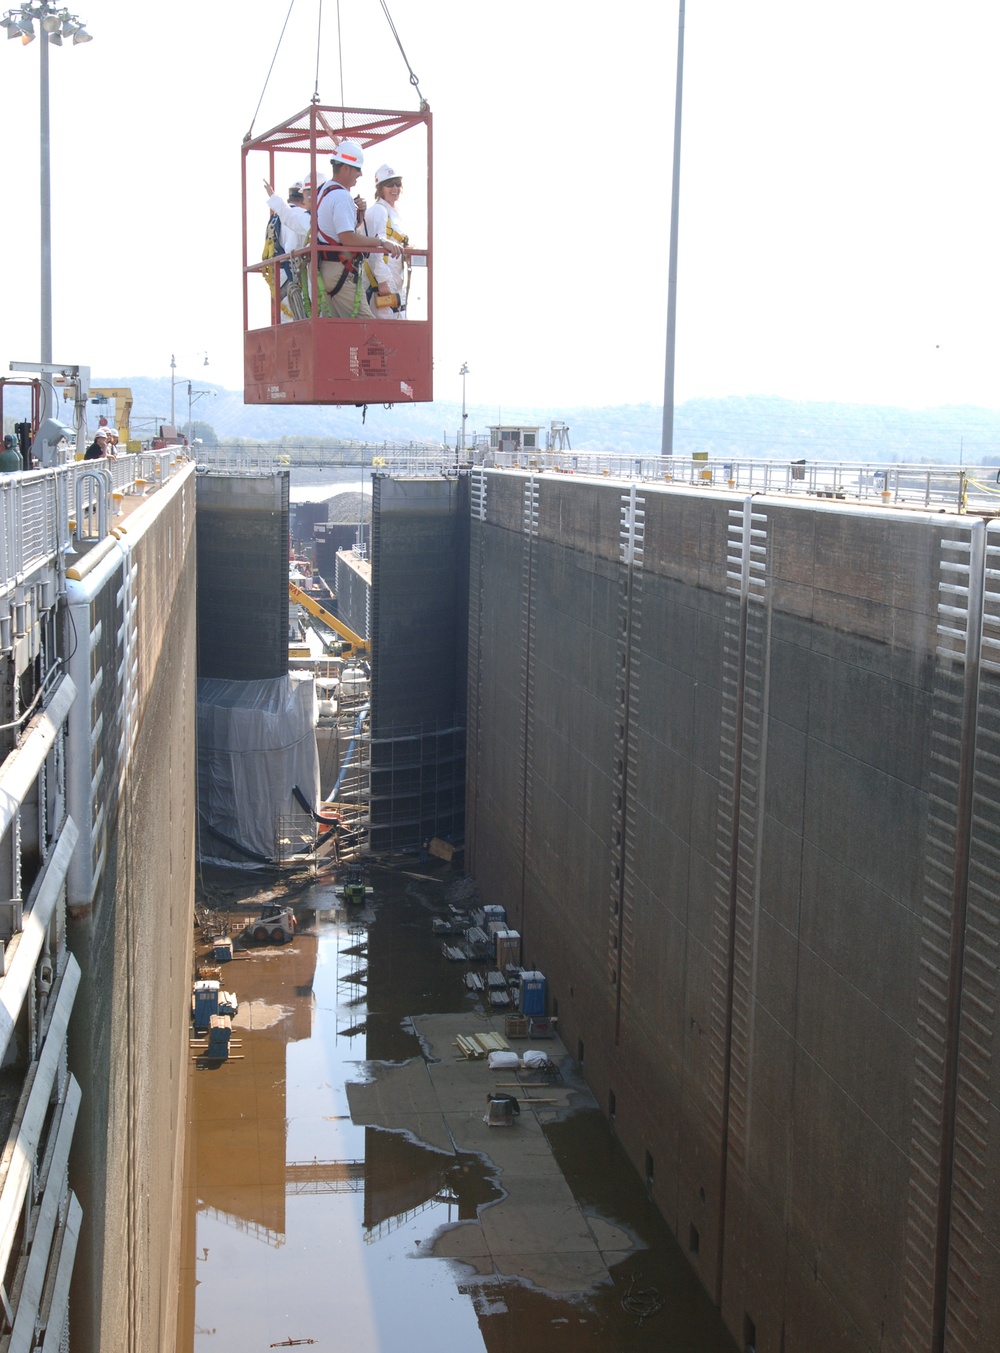 Administrative assistants see Watts Bar Lock dewatering operation